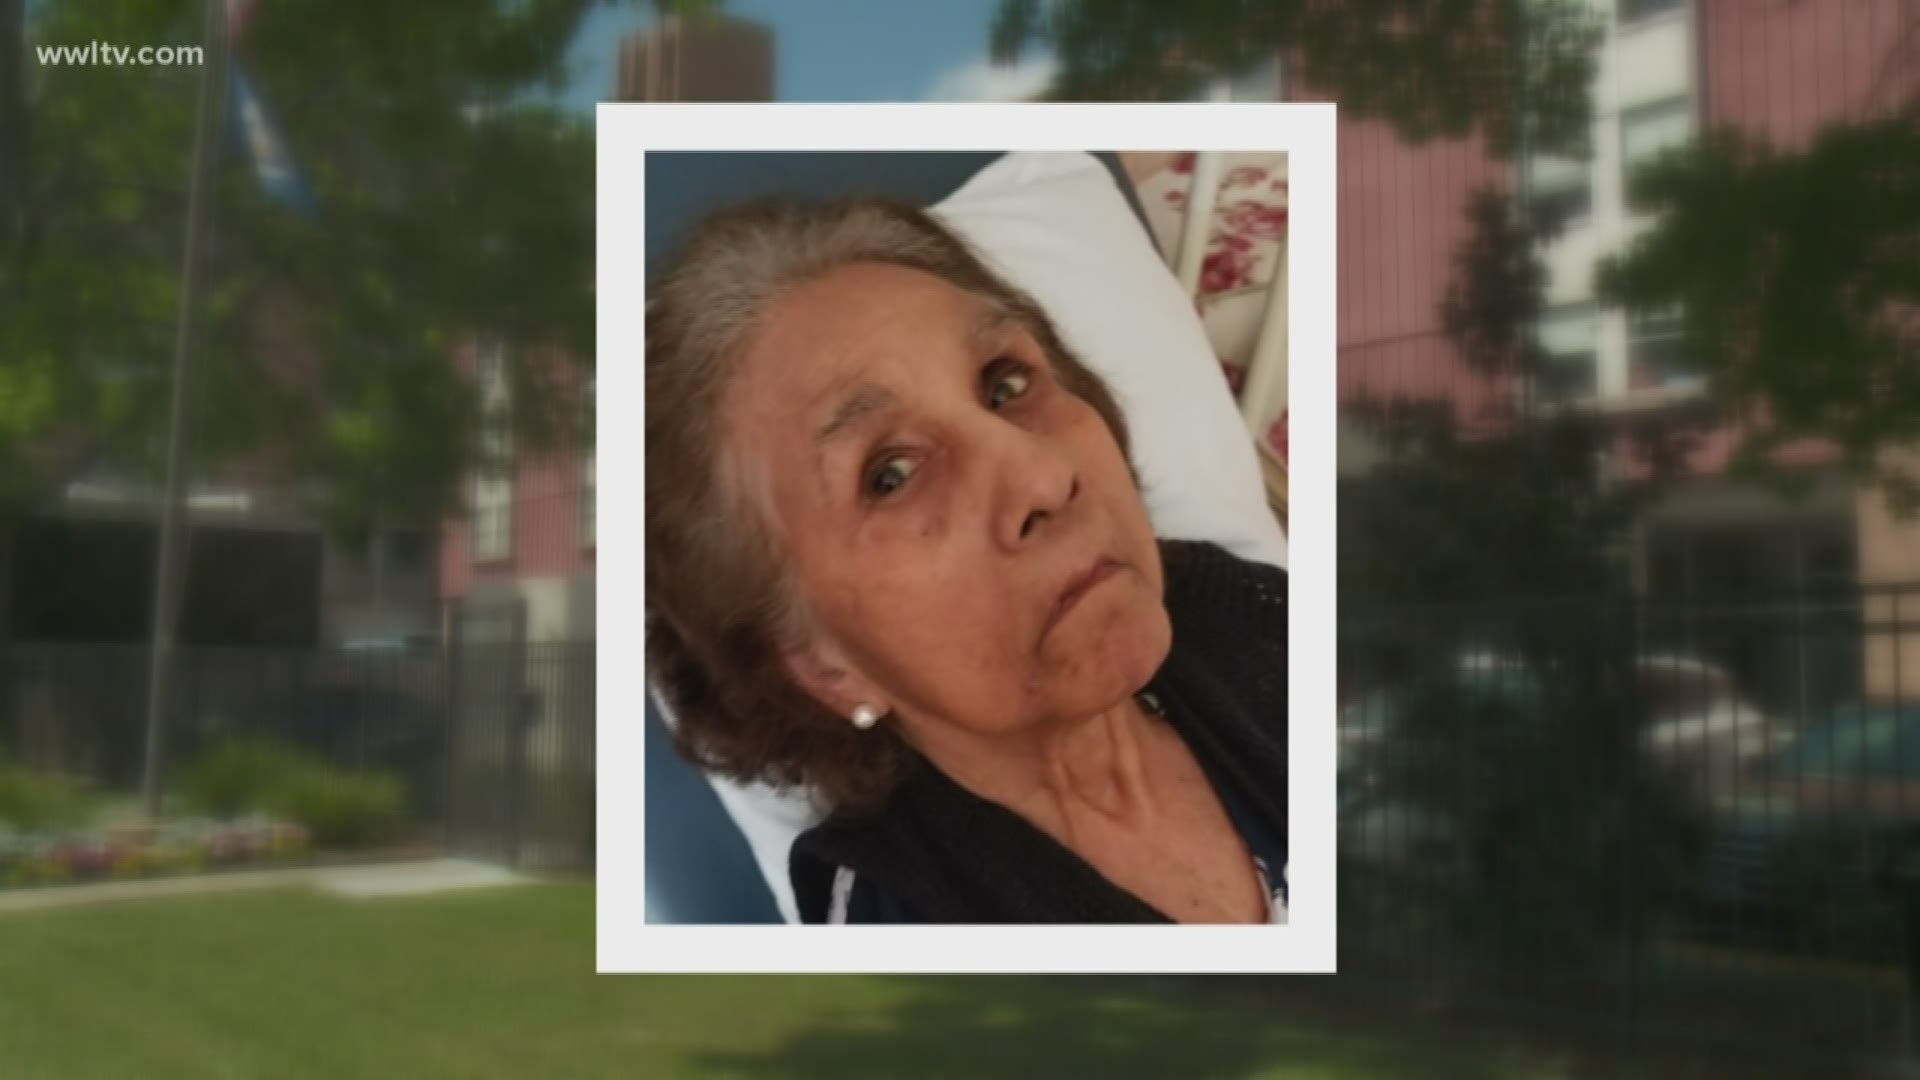 One resident's daughter told WWLTV's Mike Perlstein she's afraid she may never see her mother again.